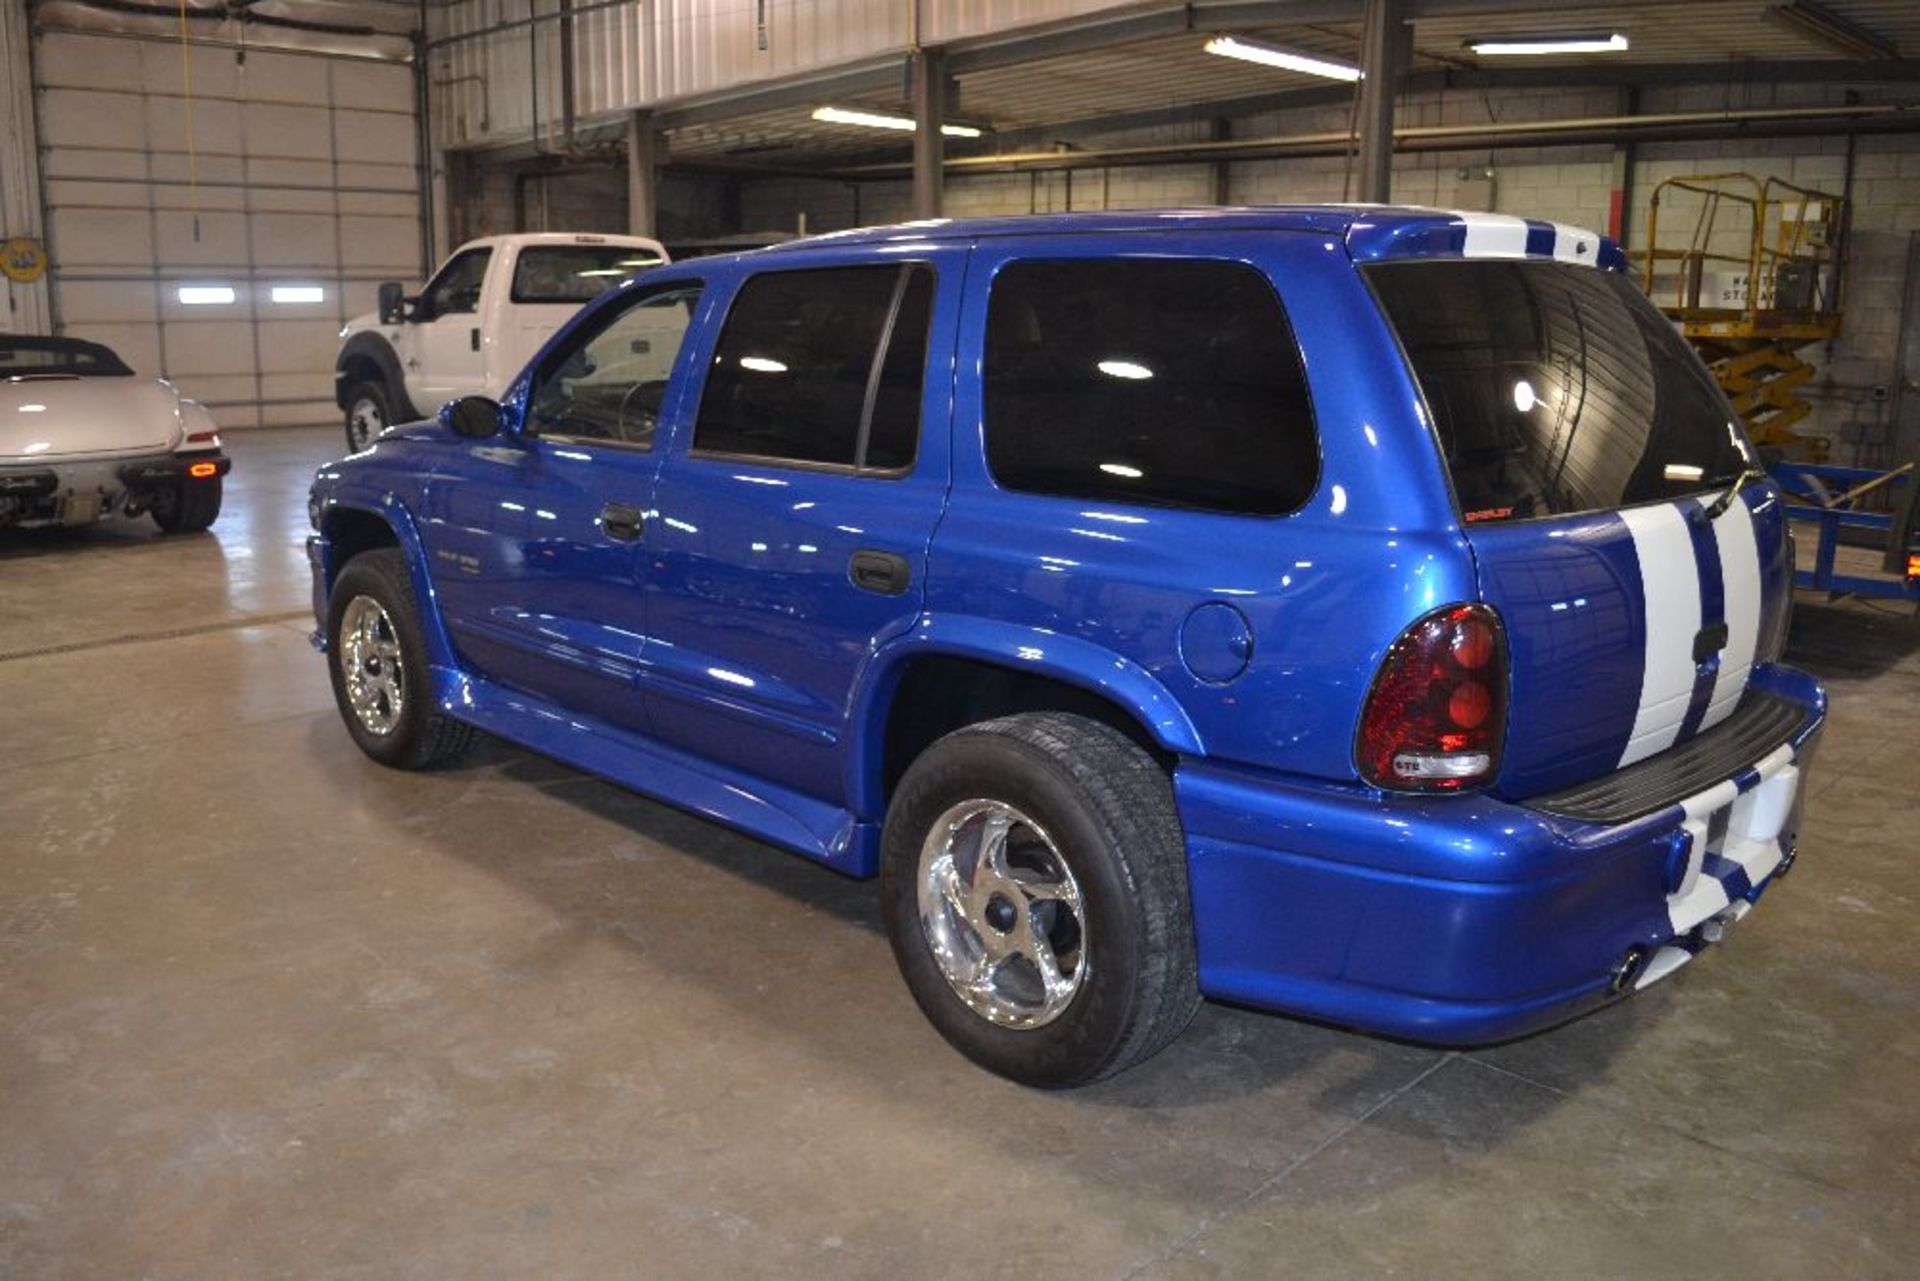 1999 Shelby Durango, approx. 18,000 miles,   V8 360 supercharged engine, automatic trans, DVD - Image 2 of 4